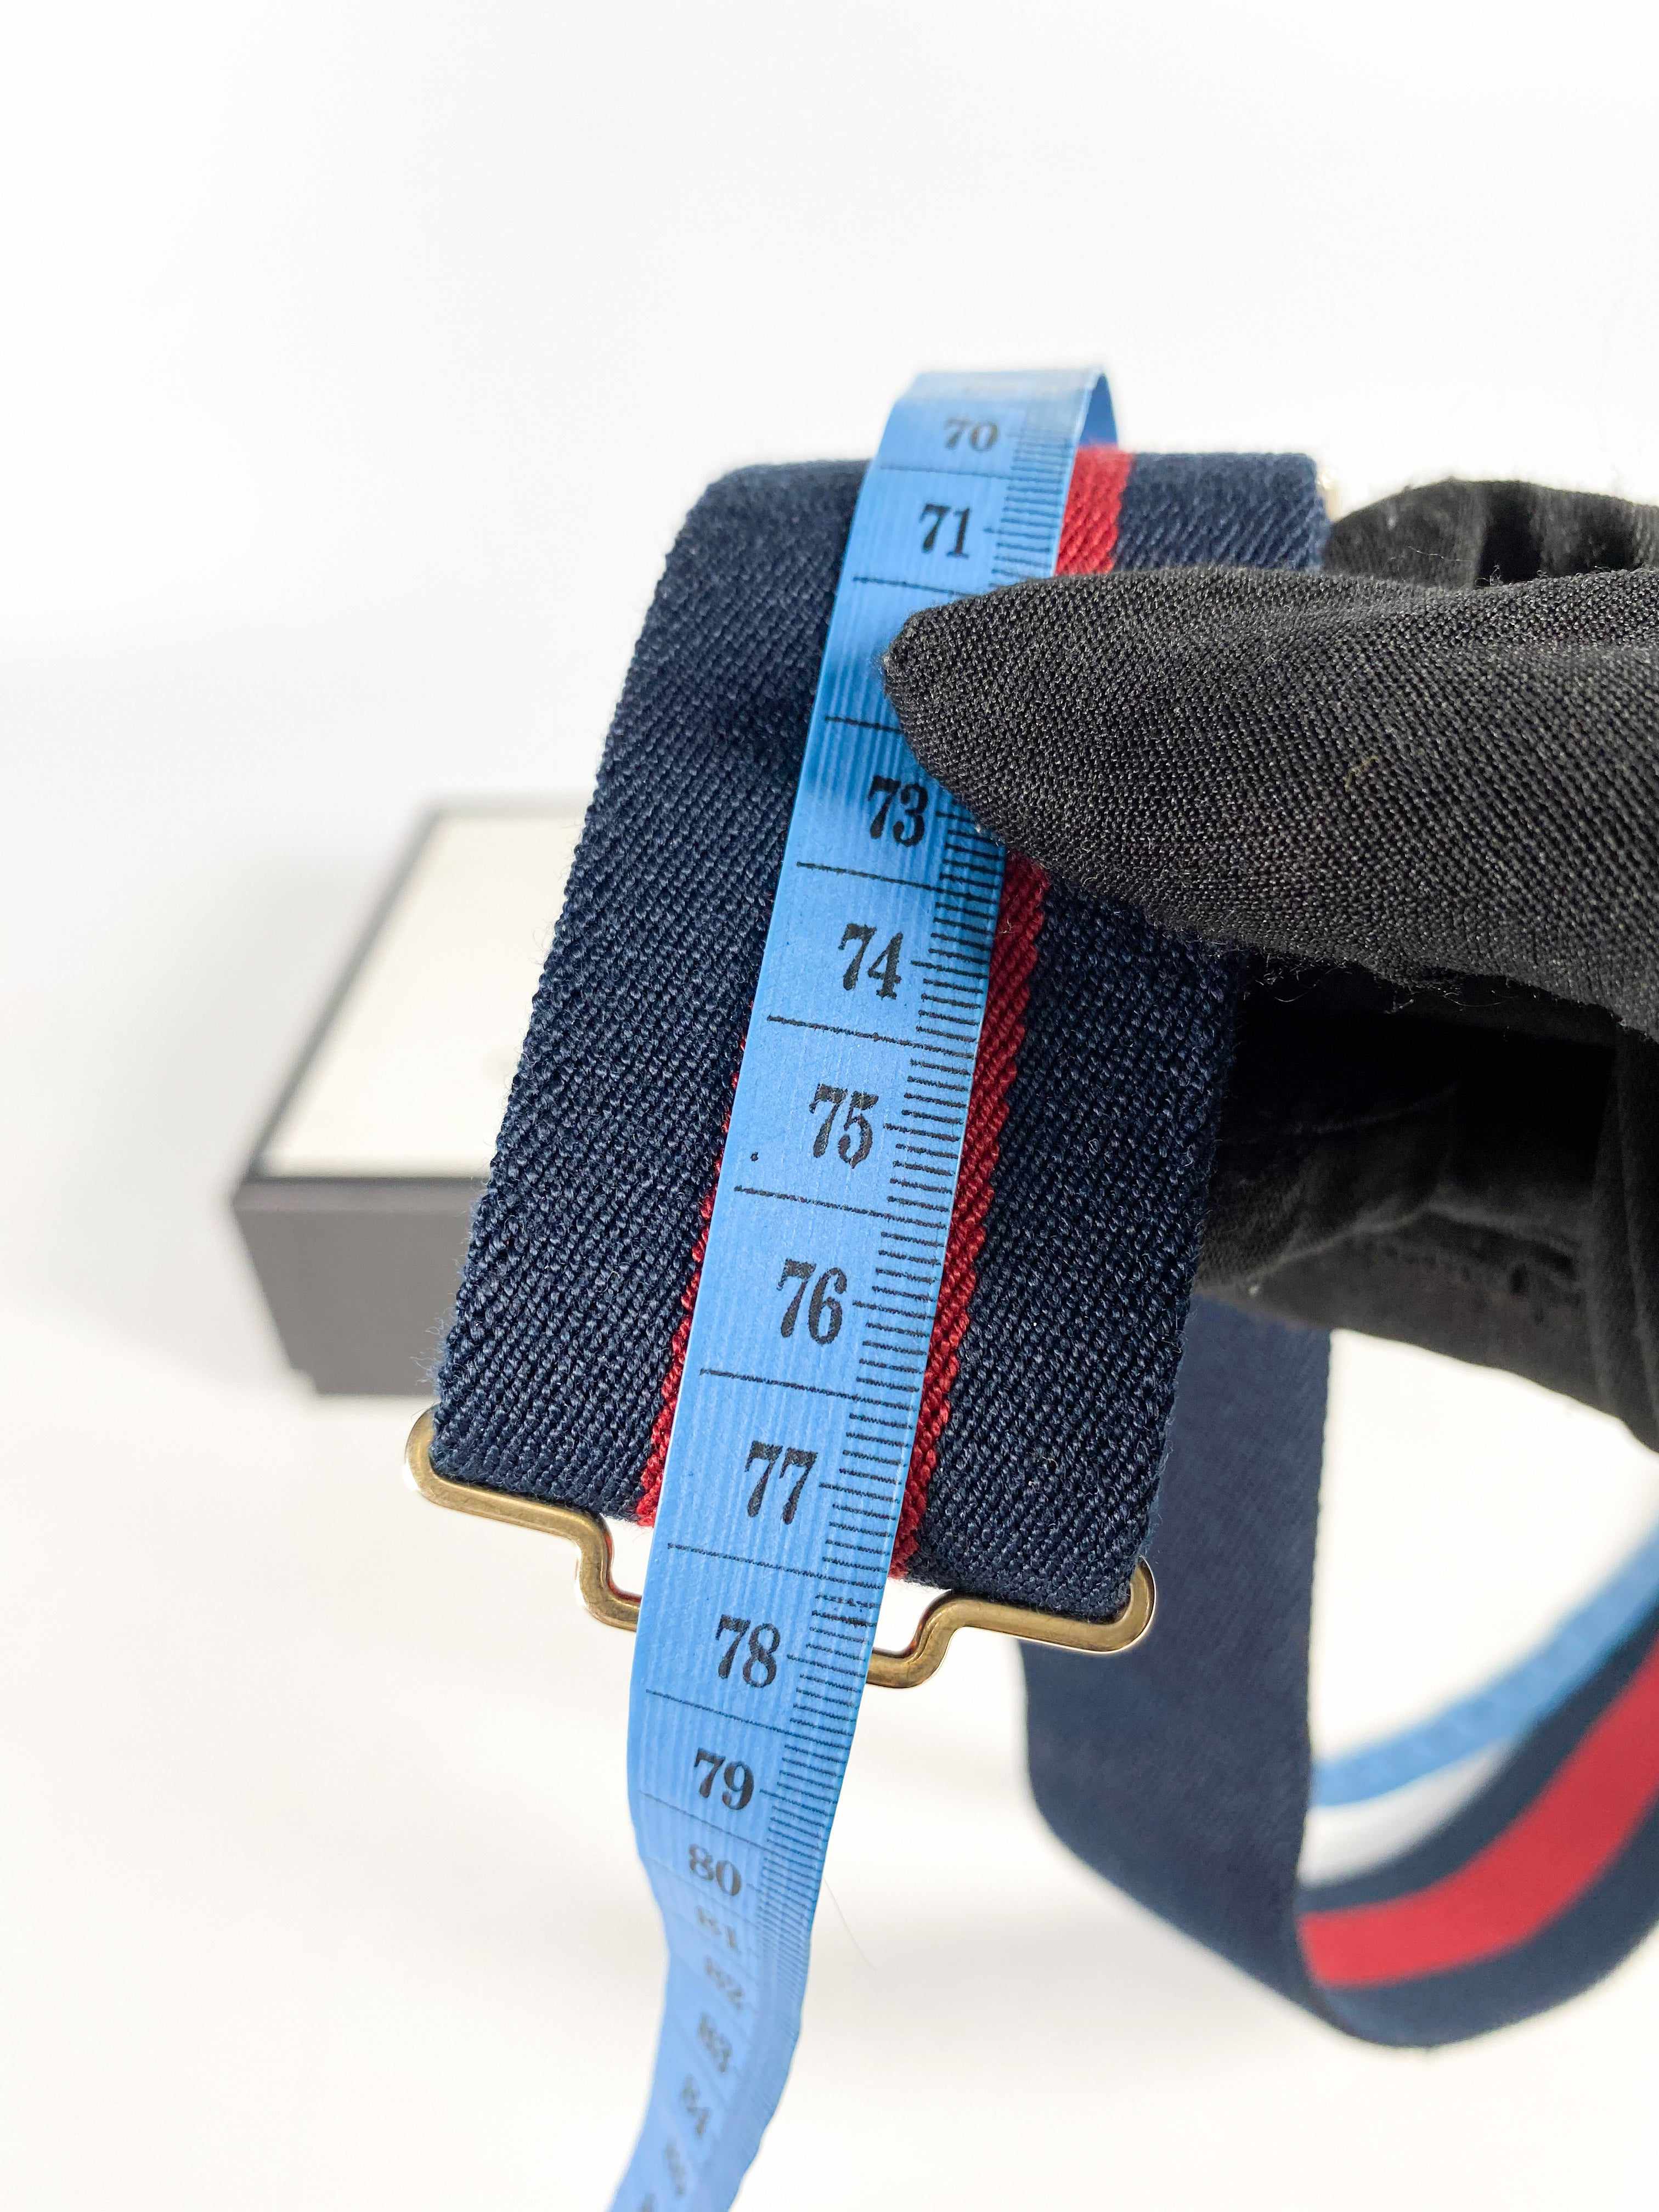 Gucci GG Buckle and Navy Blue/ Red Web Elastic Torchon Fabric Belt (85cm)